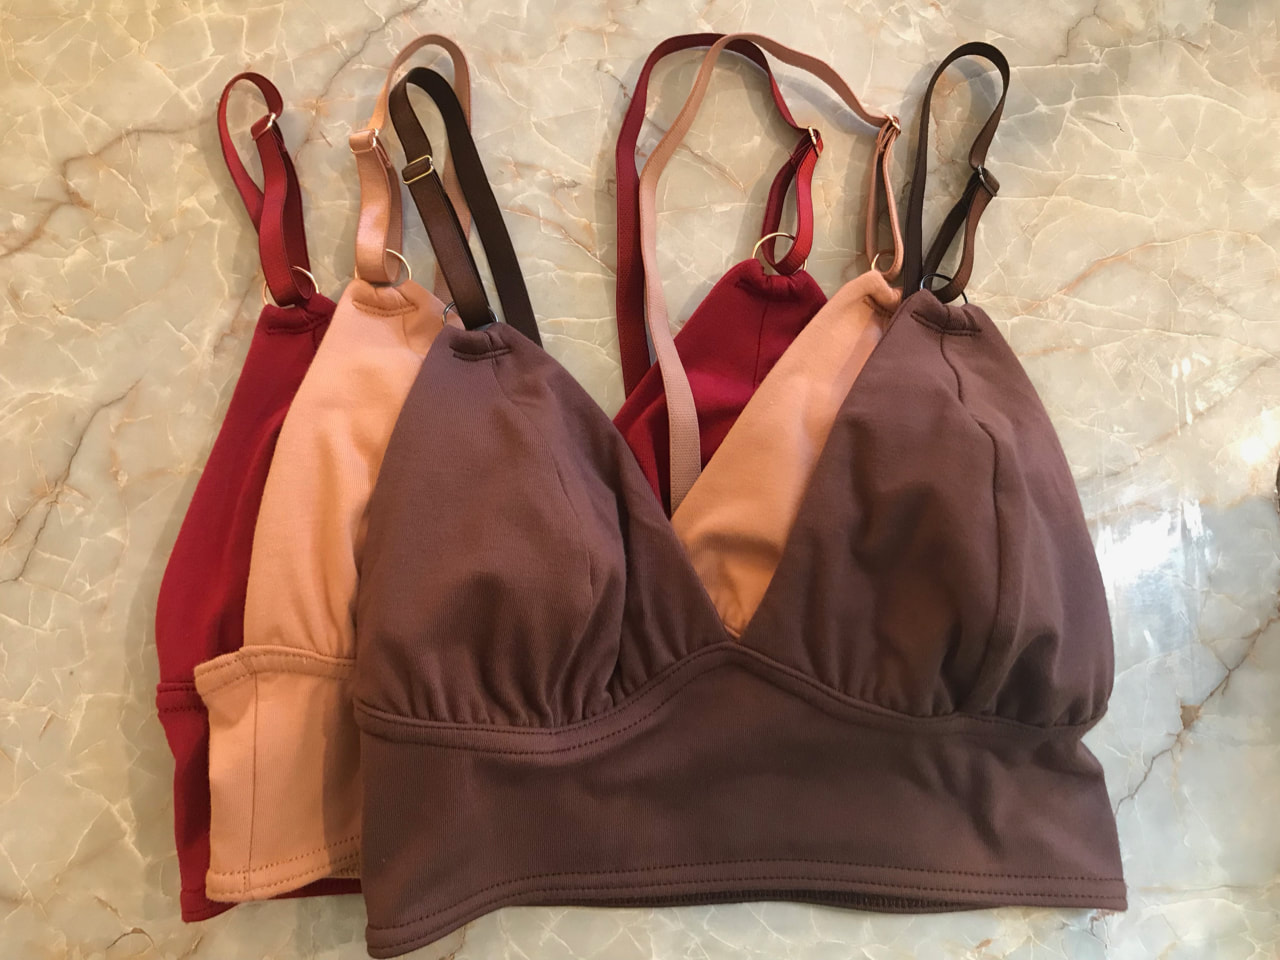 Smoothing Non Wired Plunge Bra